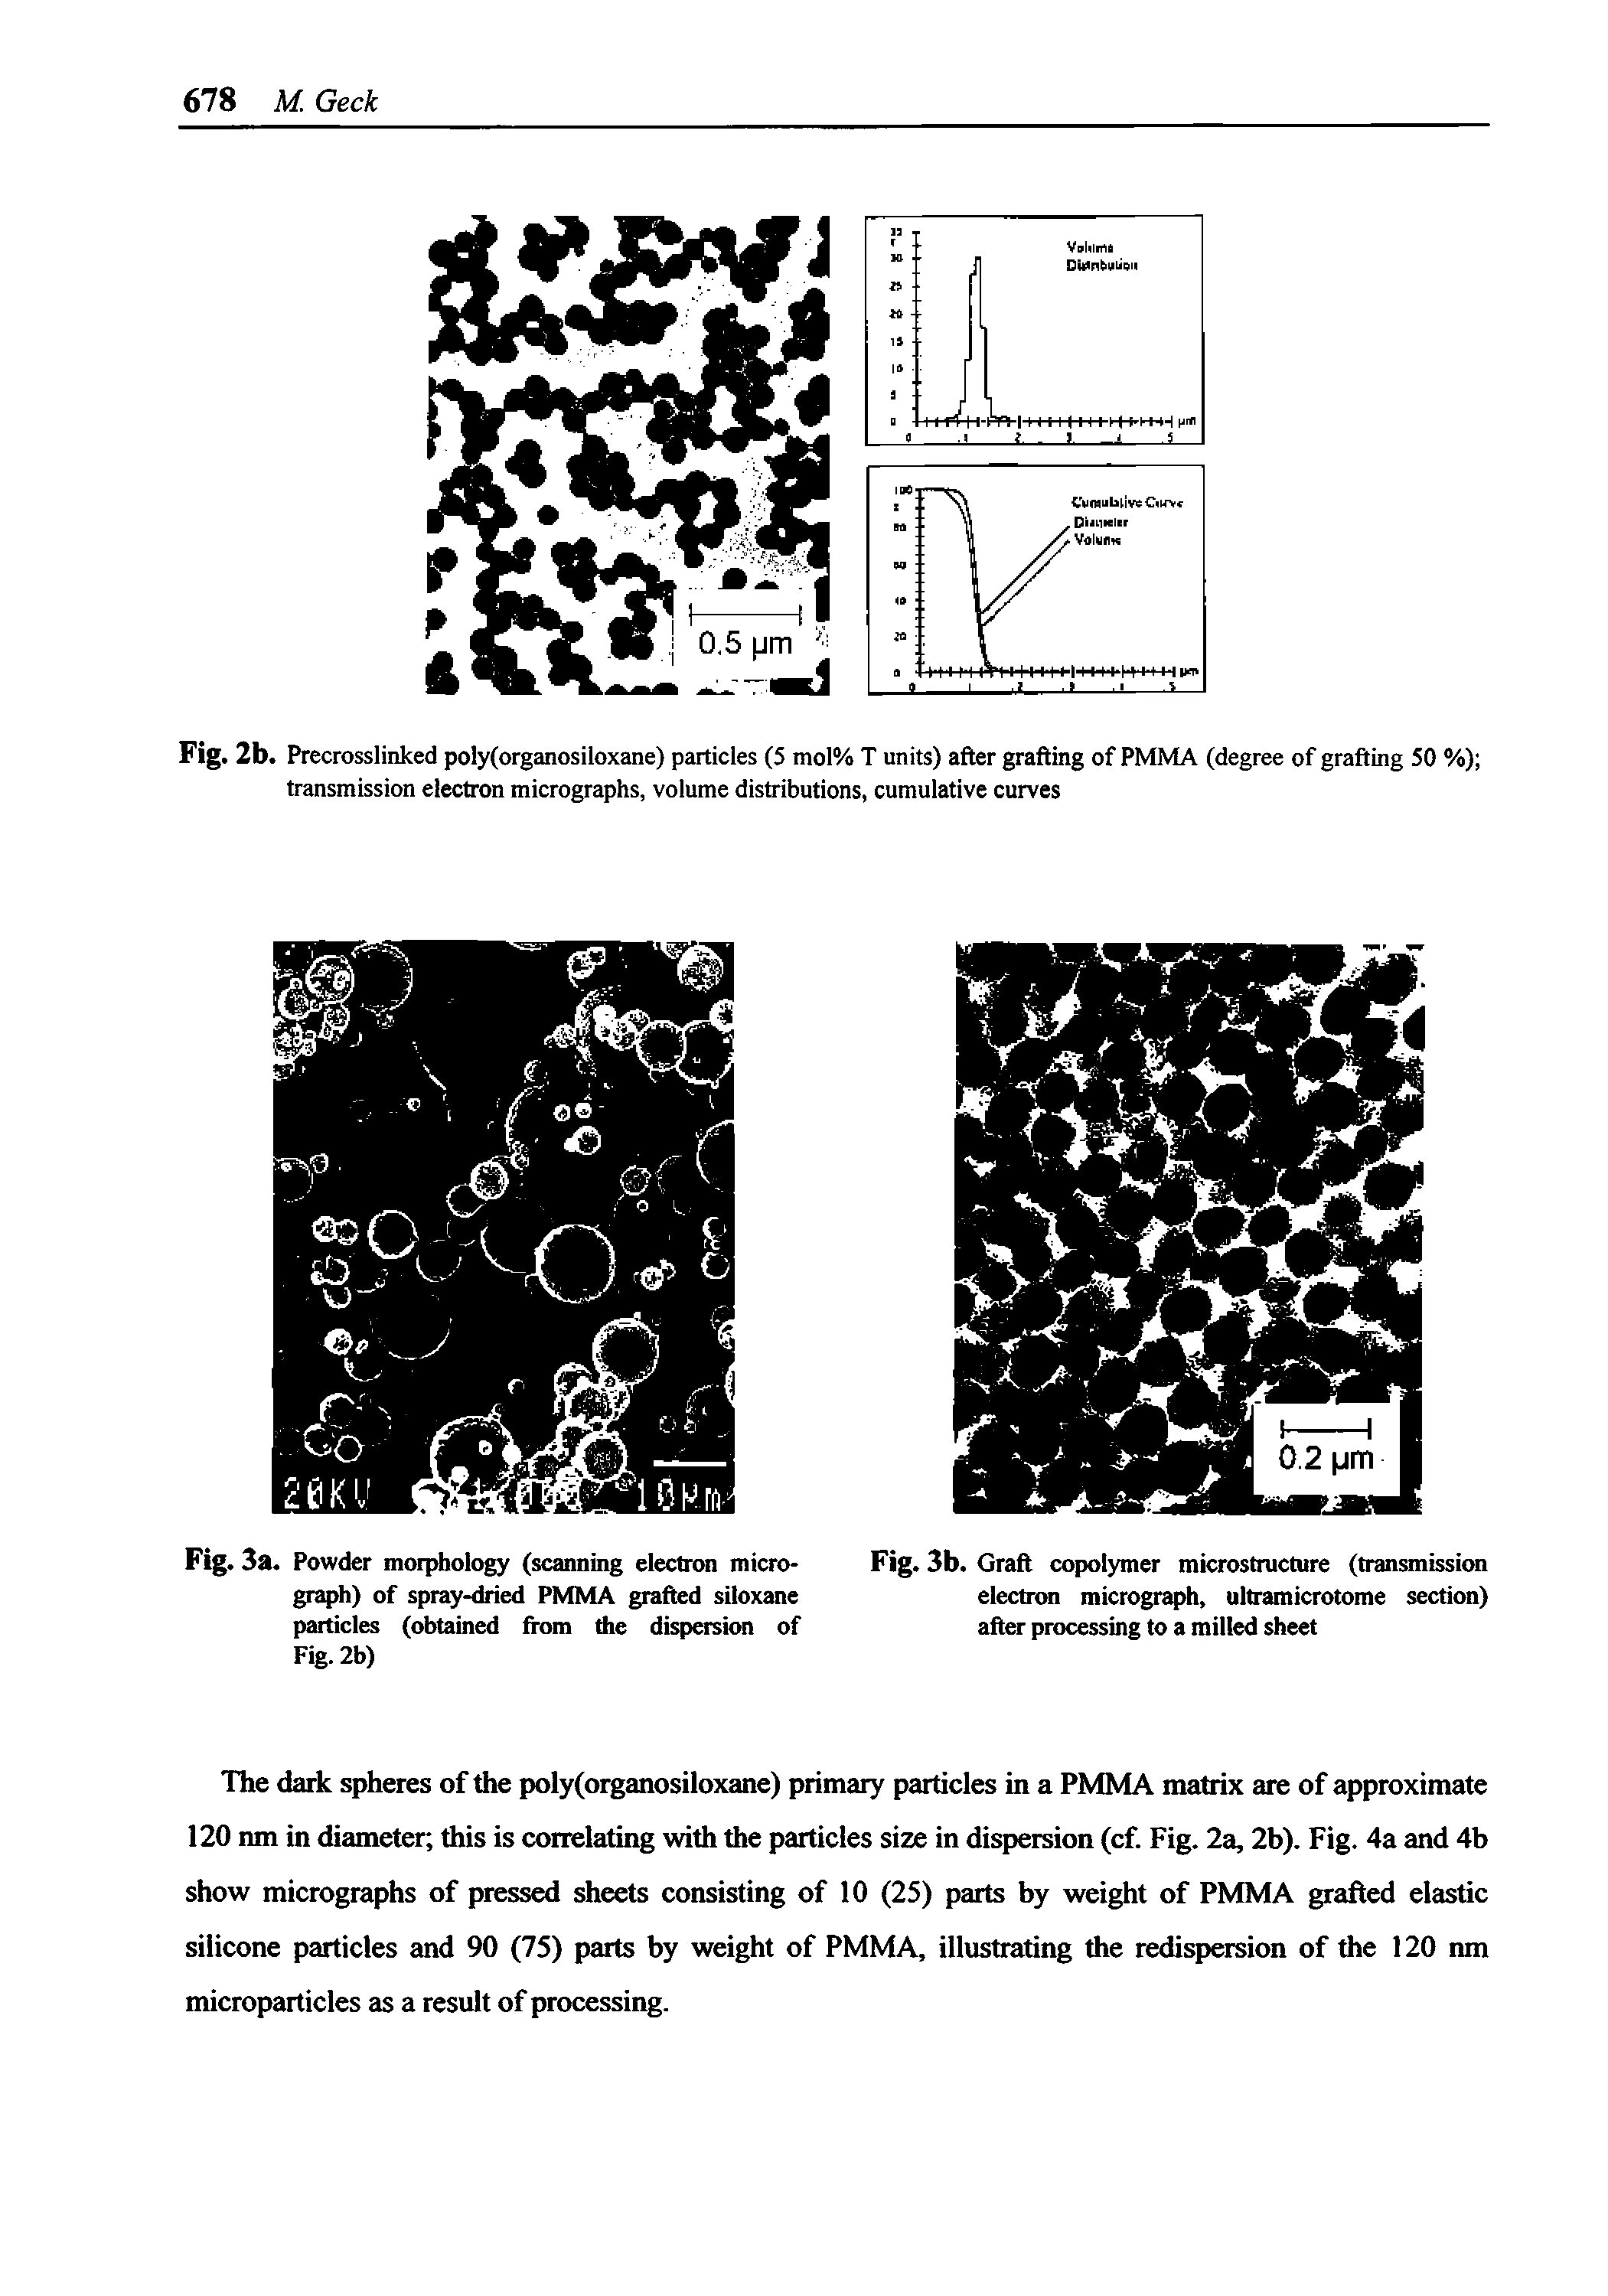 Fig. 3a. Powder morphology (scanning electron micrograph) of spray-dried PMMA grafted siloxane particles (obtained from the dispersion of Fig. 2b)...